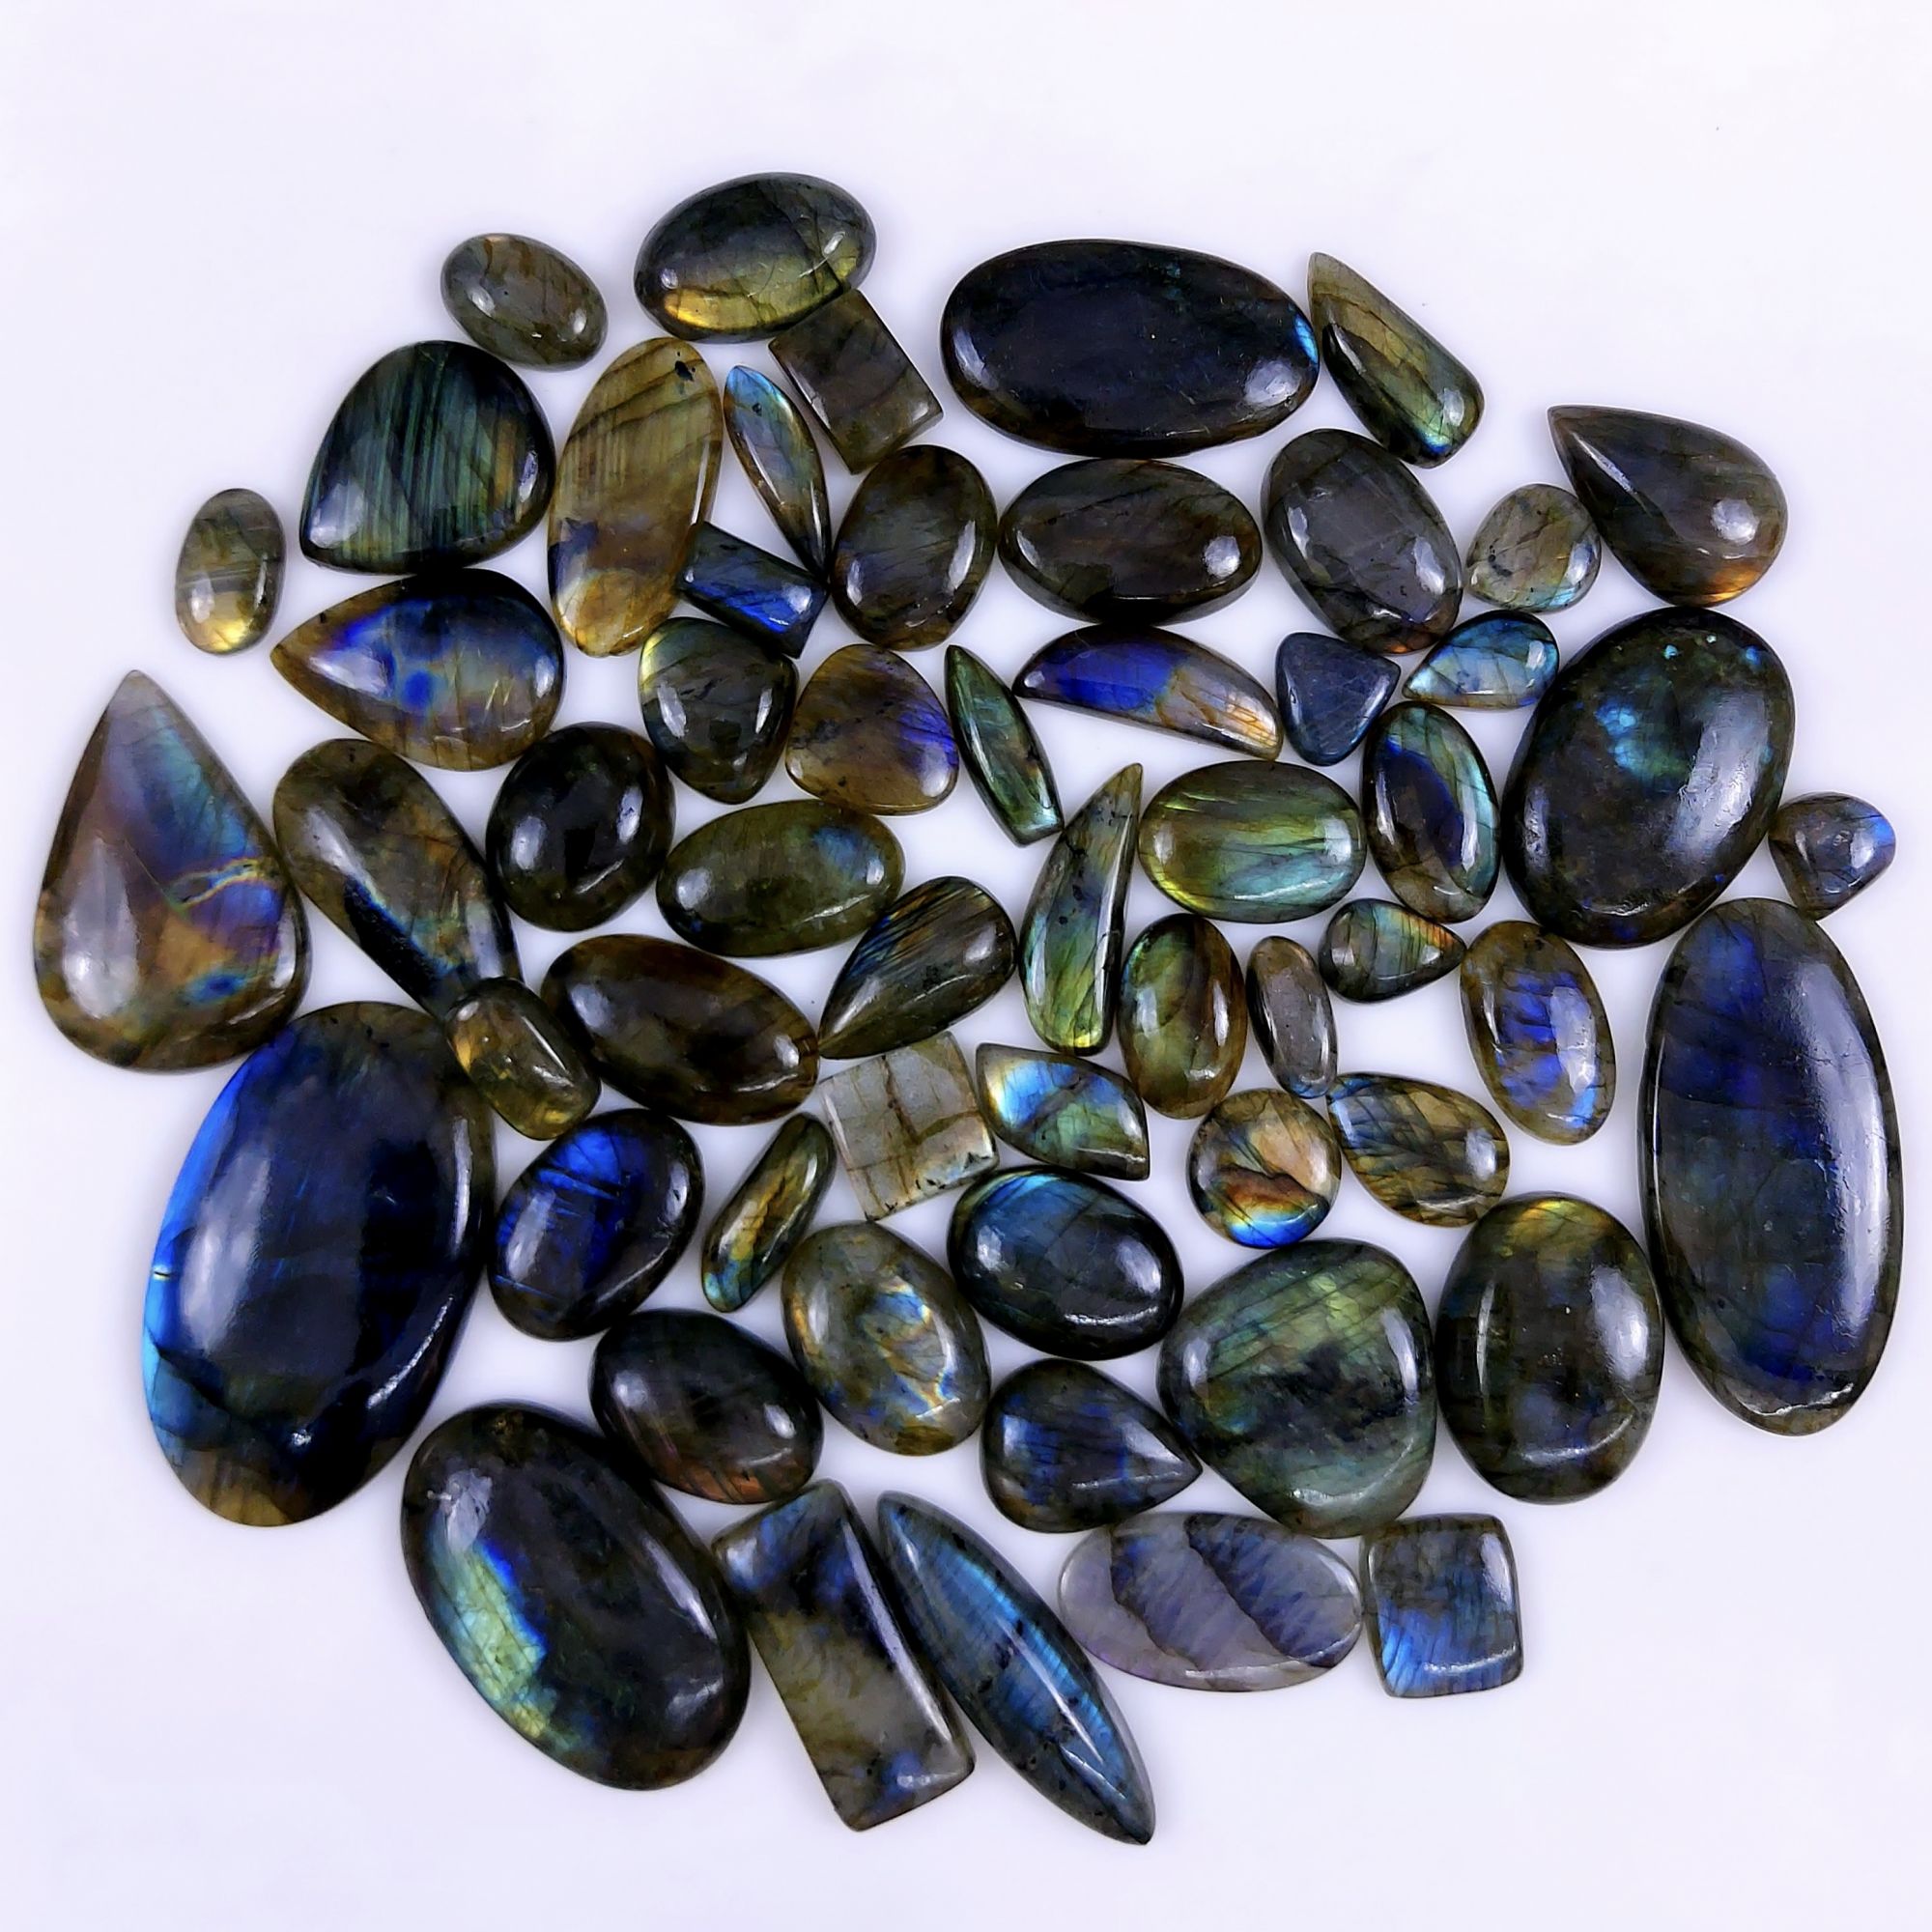 57pc 1774Cts Labradorite Cabochon Multifire Healing Crystal For Jewelry Supplies, Labradorite Necklace Handmade Wire Wrapped Gemstone Pendant 60x35 15x15mm#6273